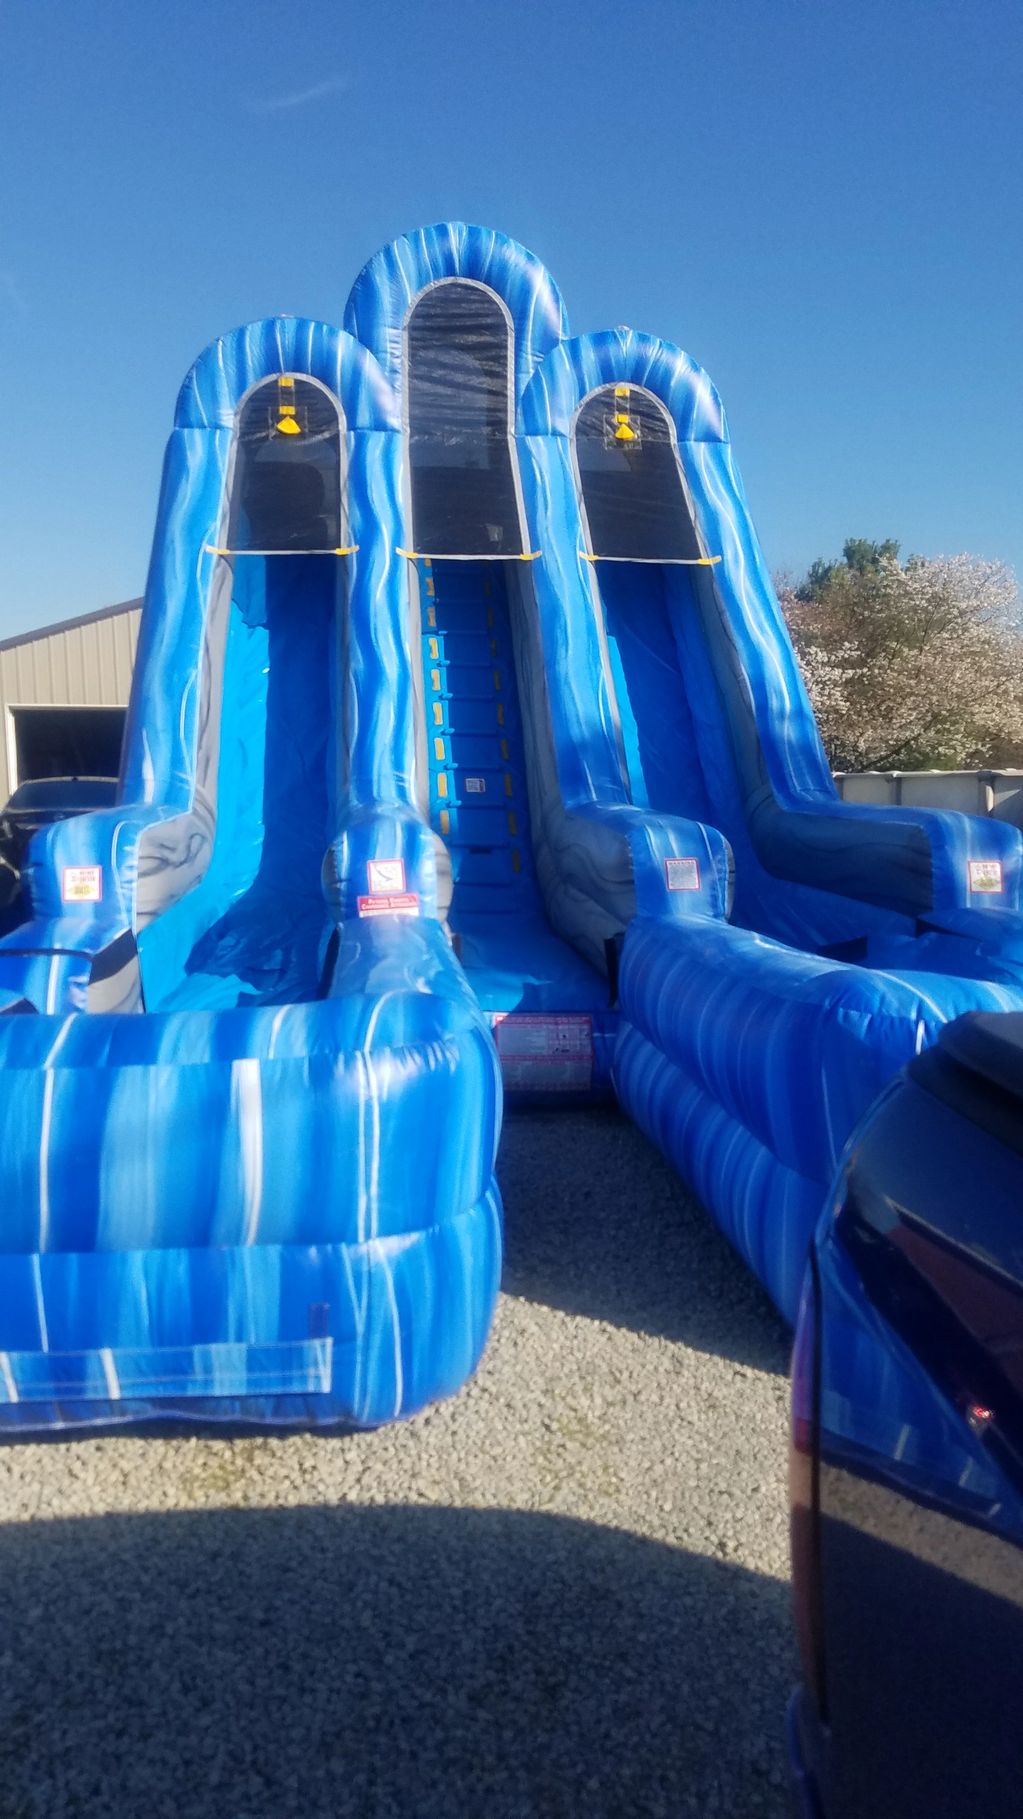 DOUBLE BLUE MARBLE
20FT Tall 40ft long 20ft wide
Dual lane slide with pools
400.00